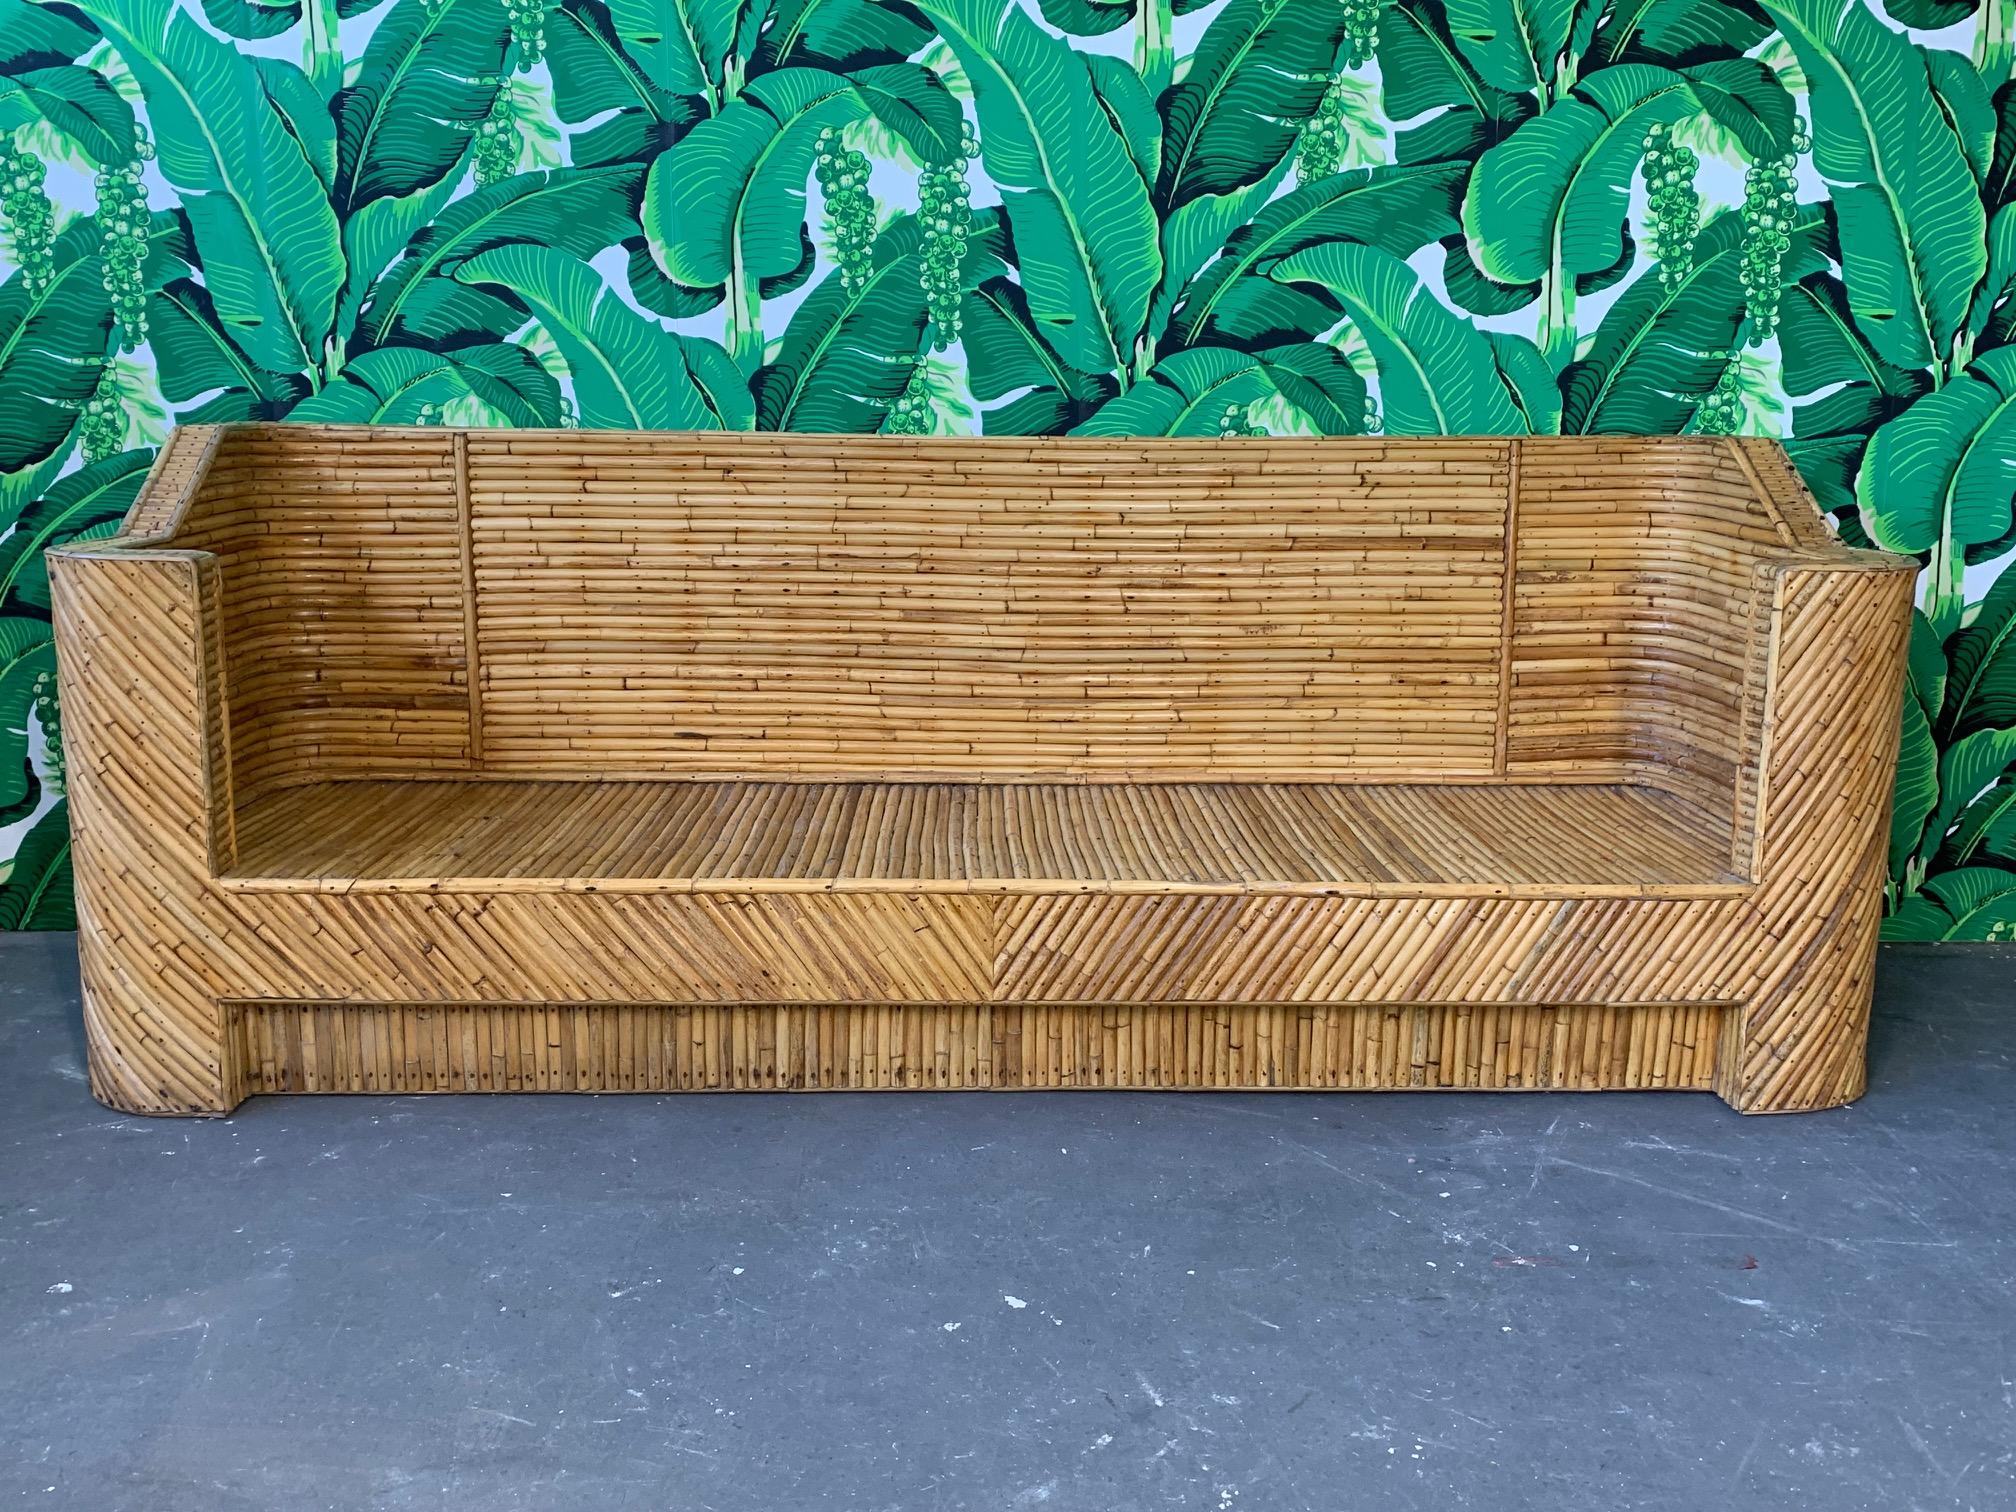 Vintage split pencil reed bamboo sofa, circa 1960s purchased by original owner in Guam. Very heavy, excellent construction, minor signs of age appropriate wear to finish.